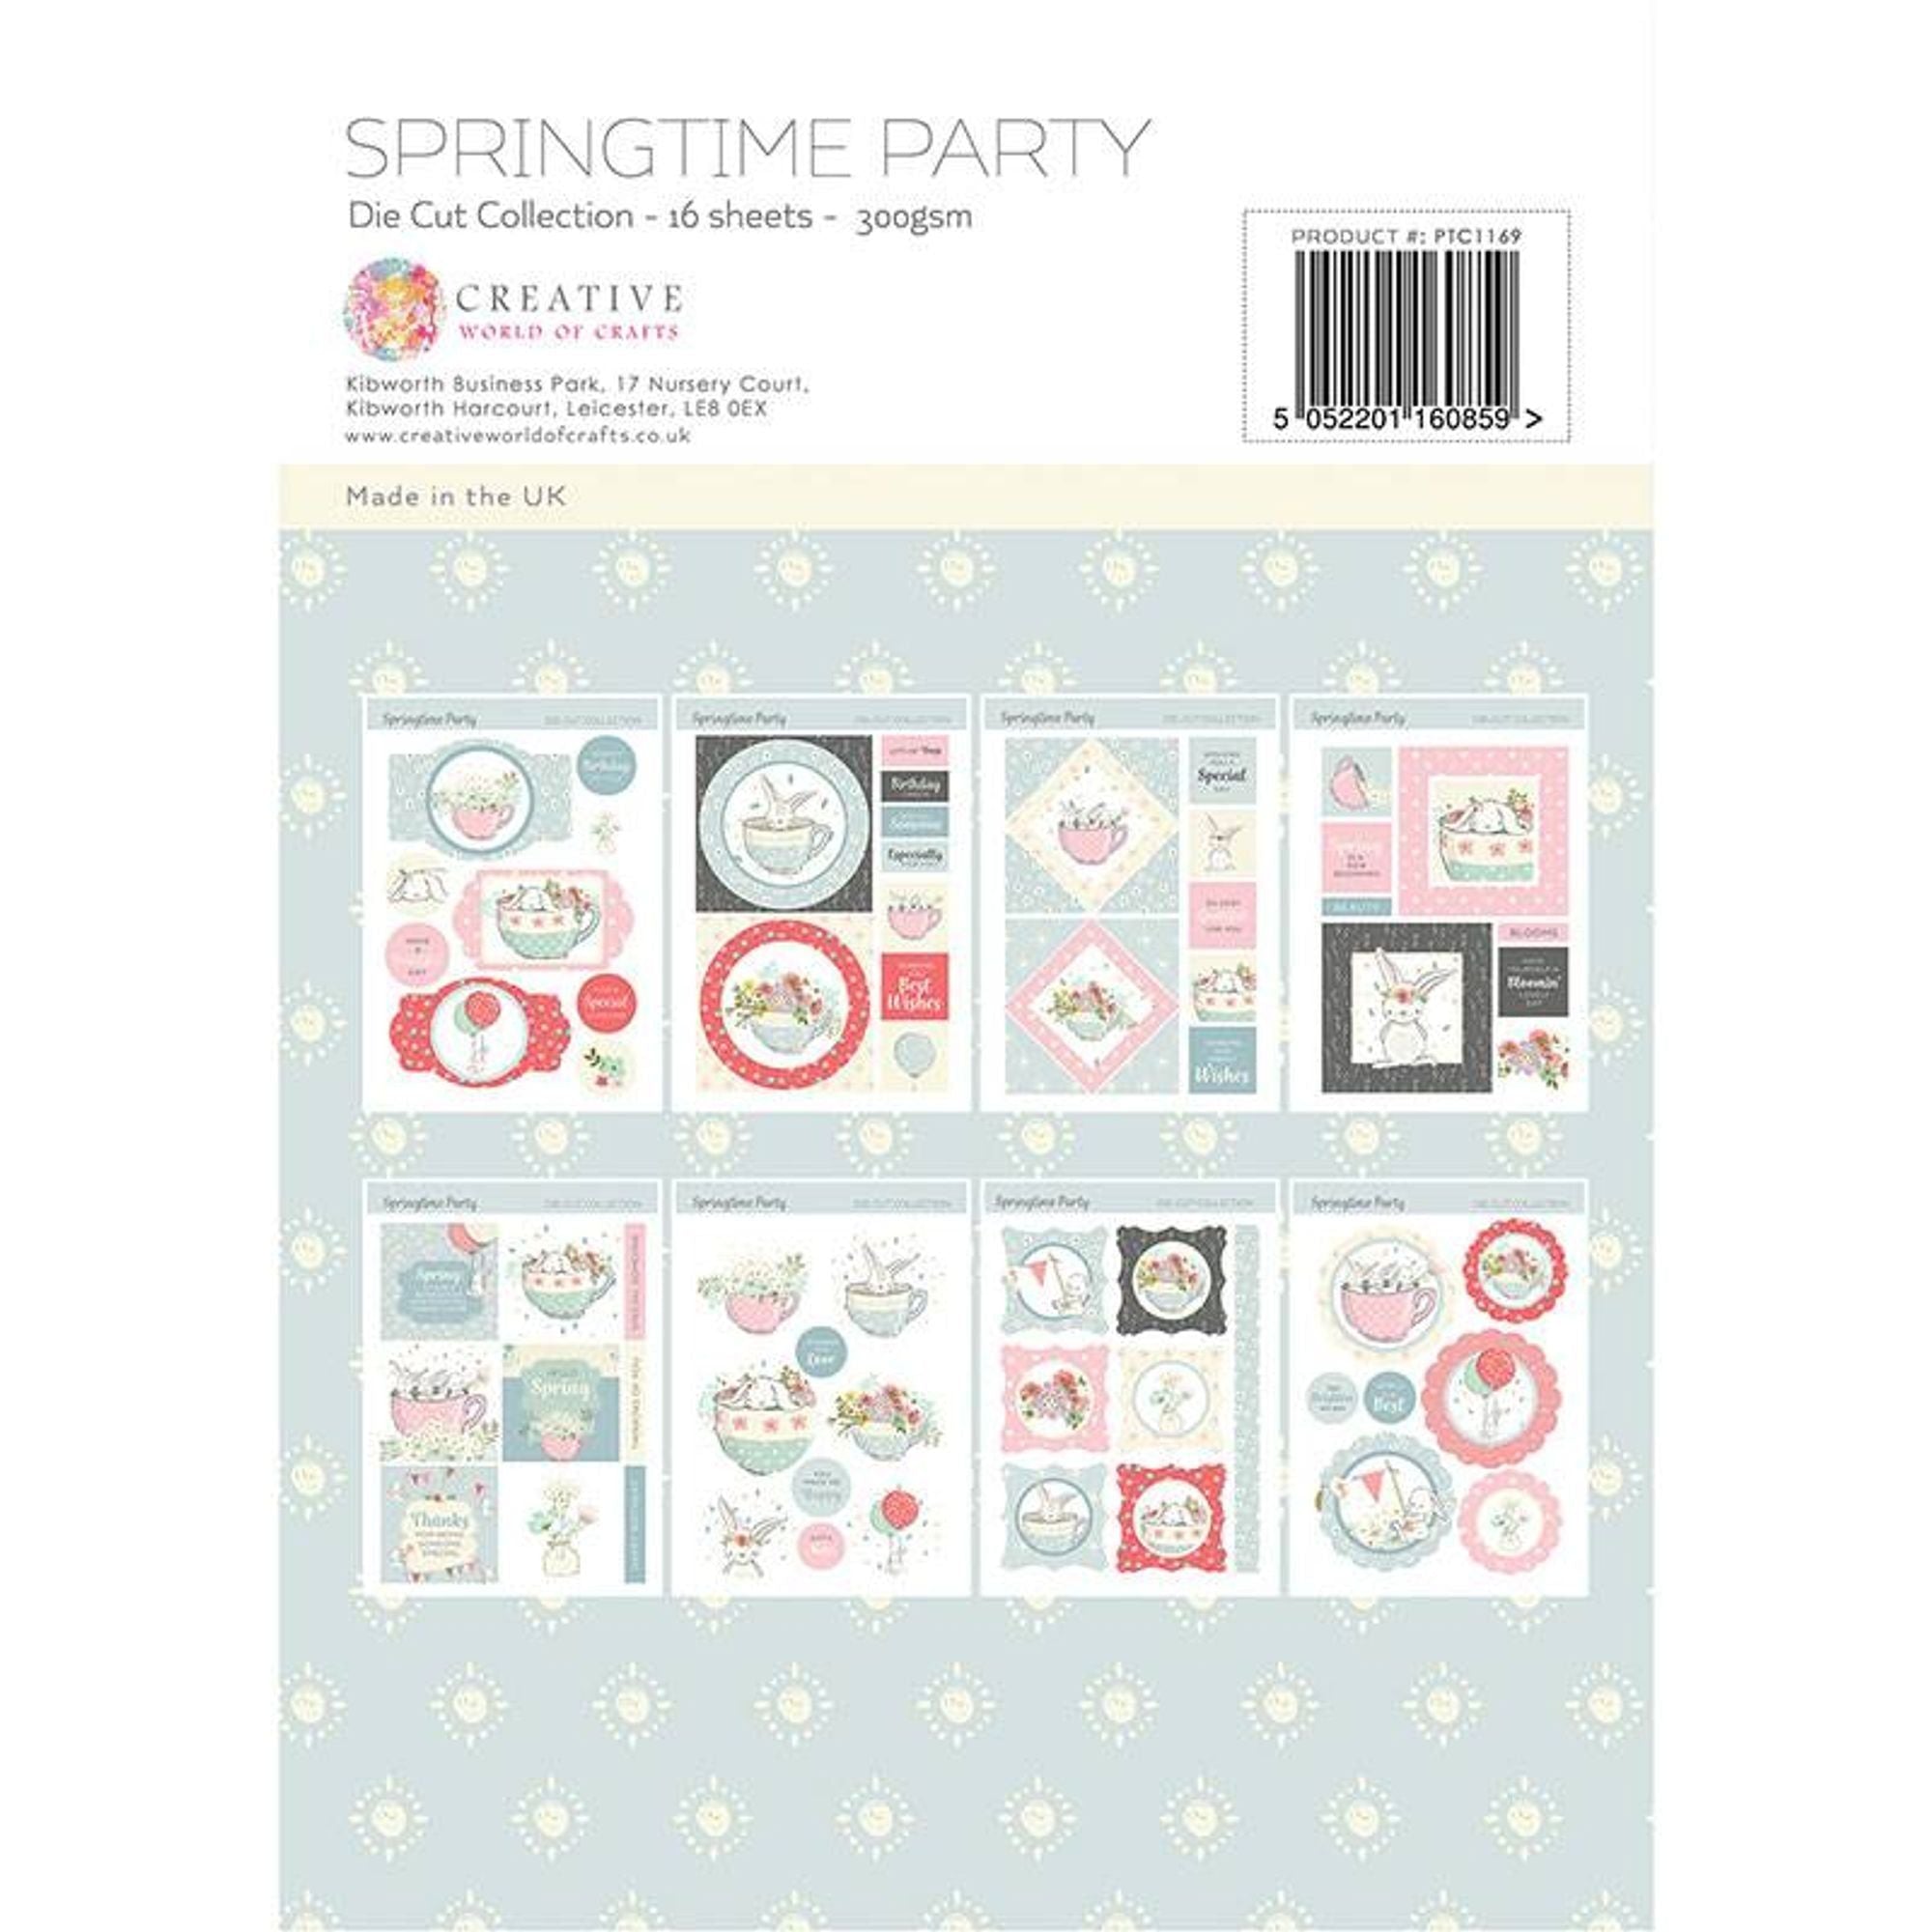 The Paper Tree Springtime Party A4 Die Cut sheets